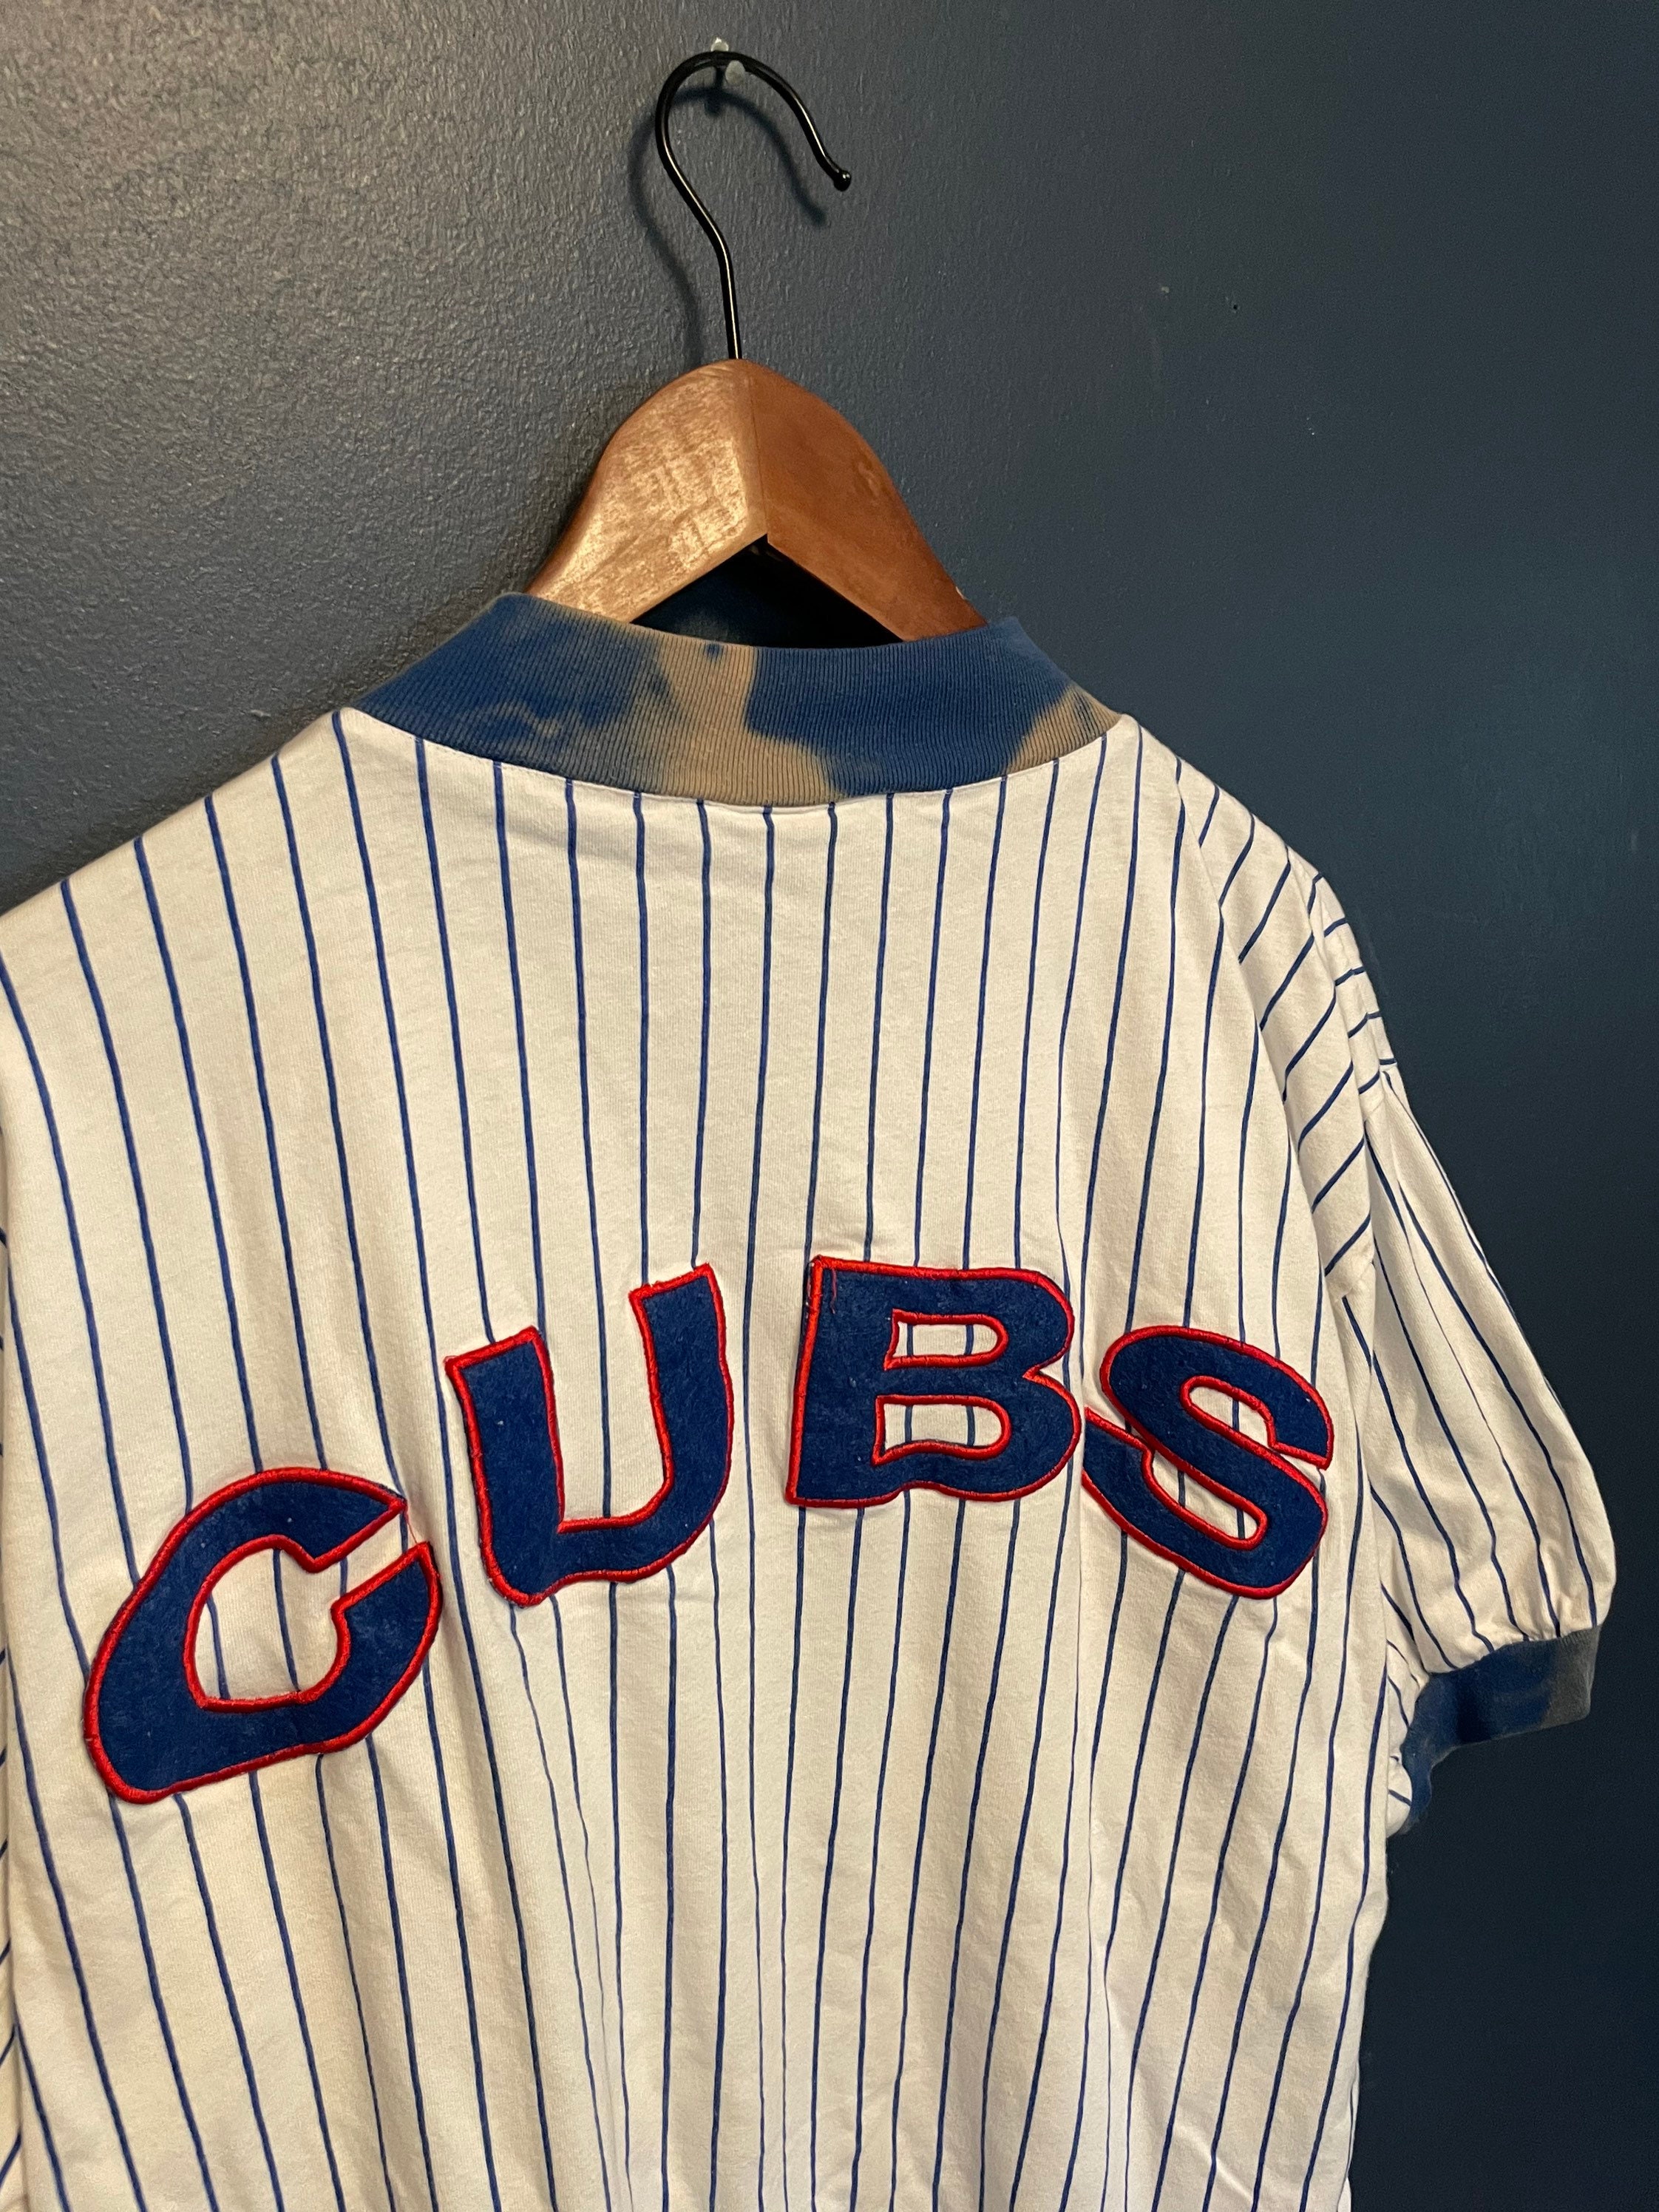 CustomProductdesigns Custom Personalized Adult/ Youth Chicago Cubs Any Name and Number T-Shirt